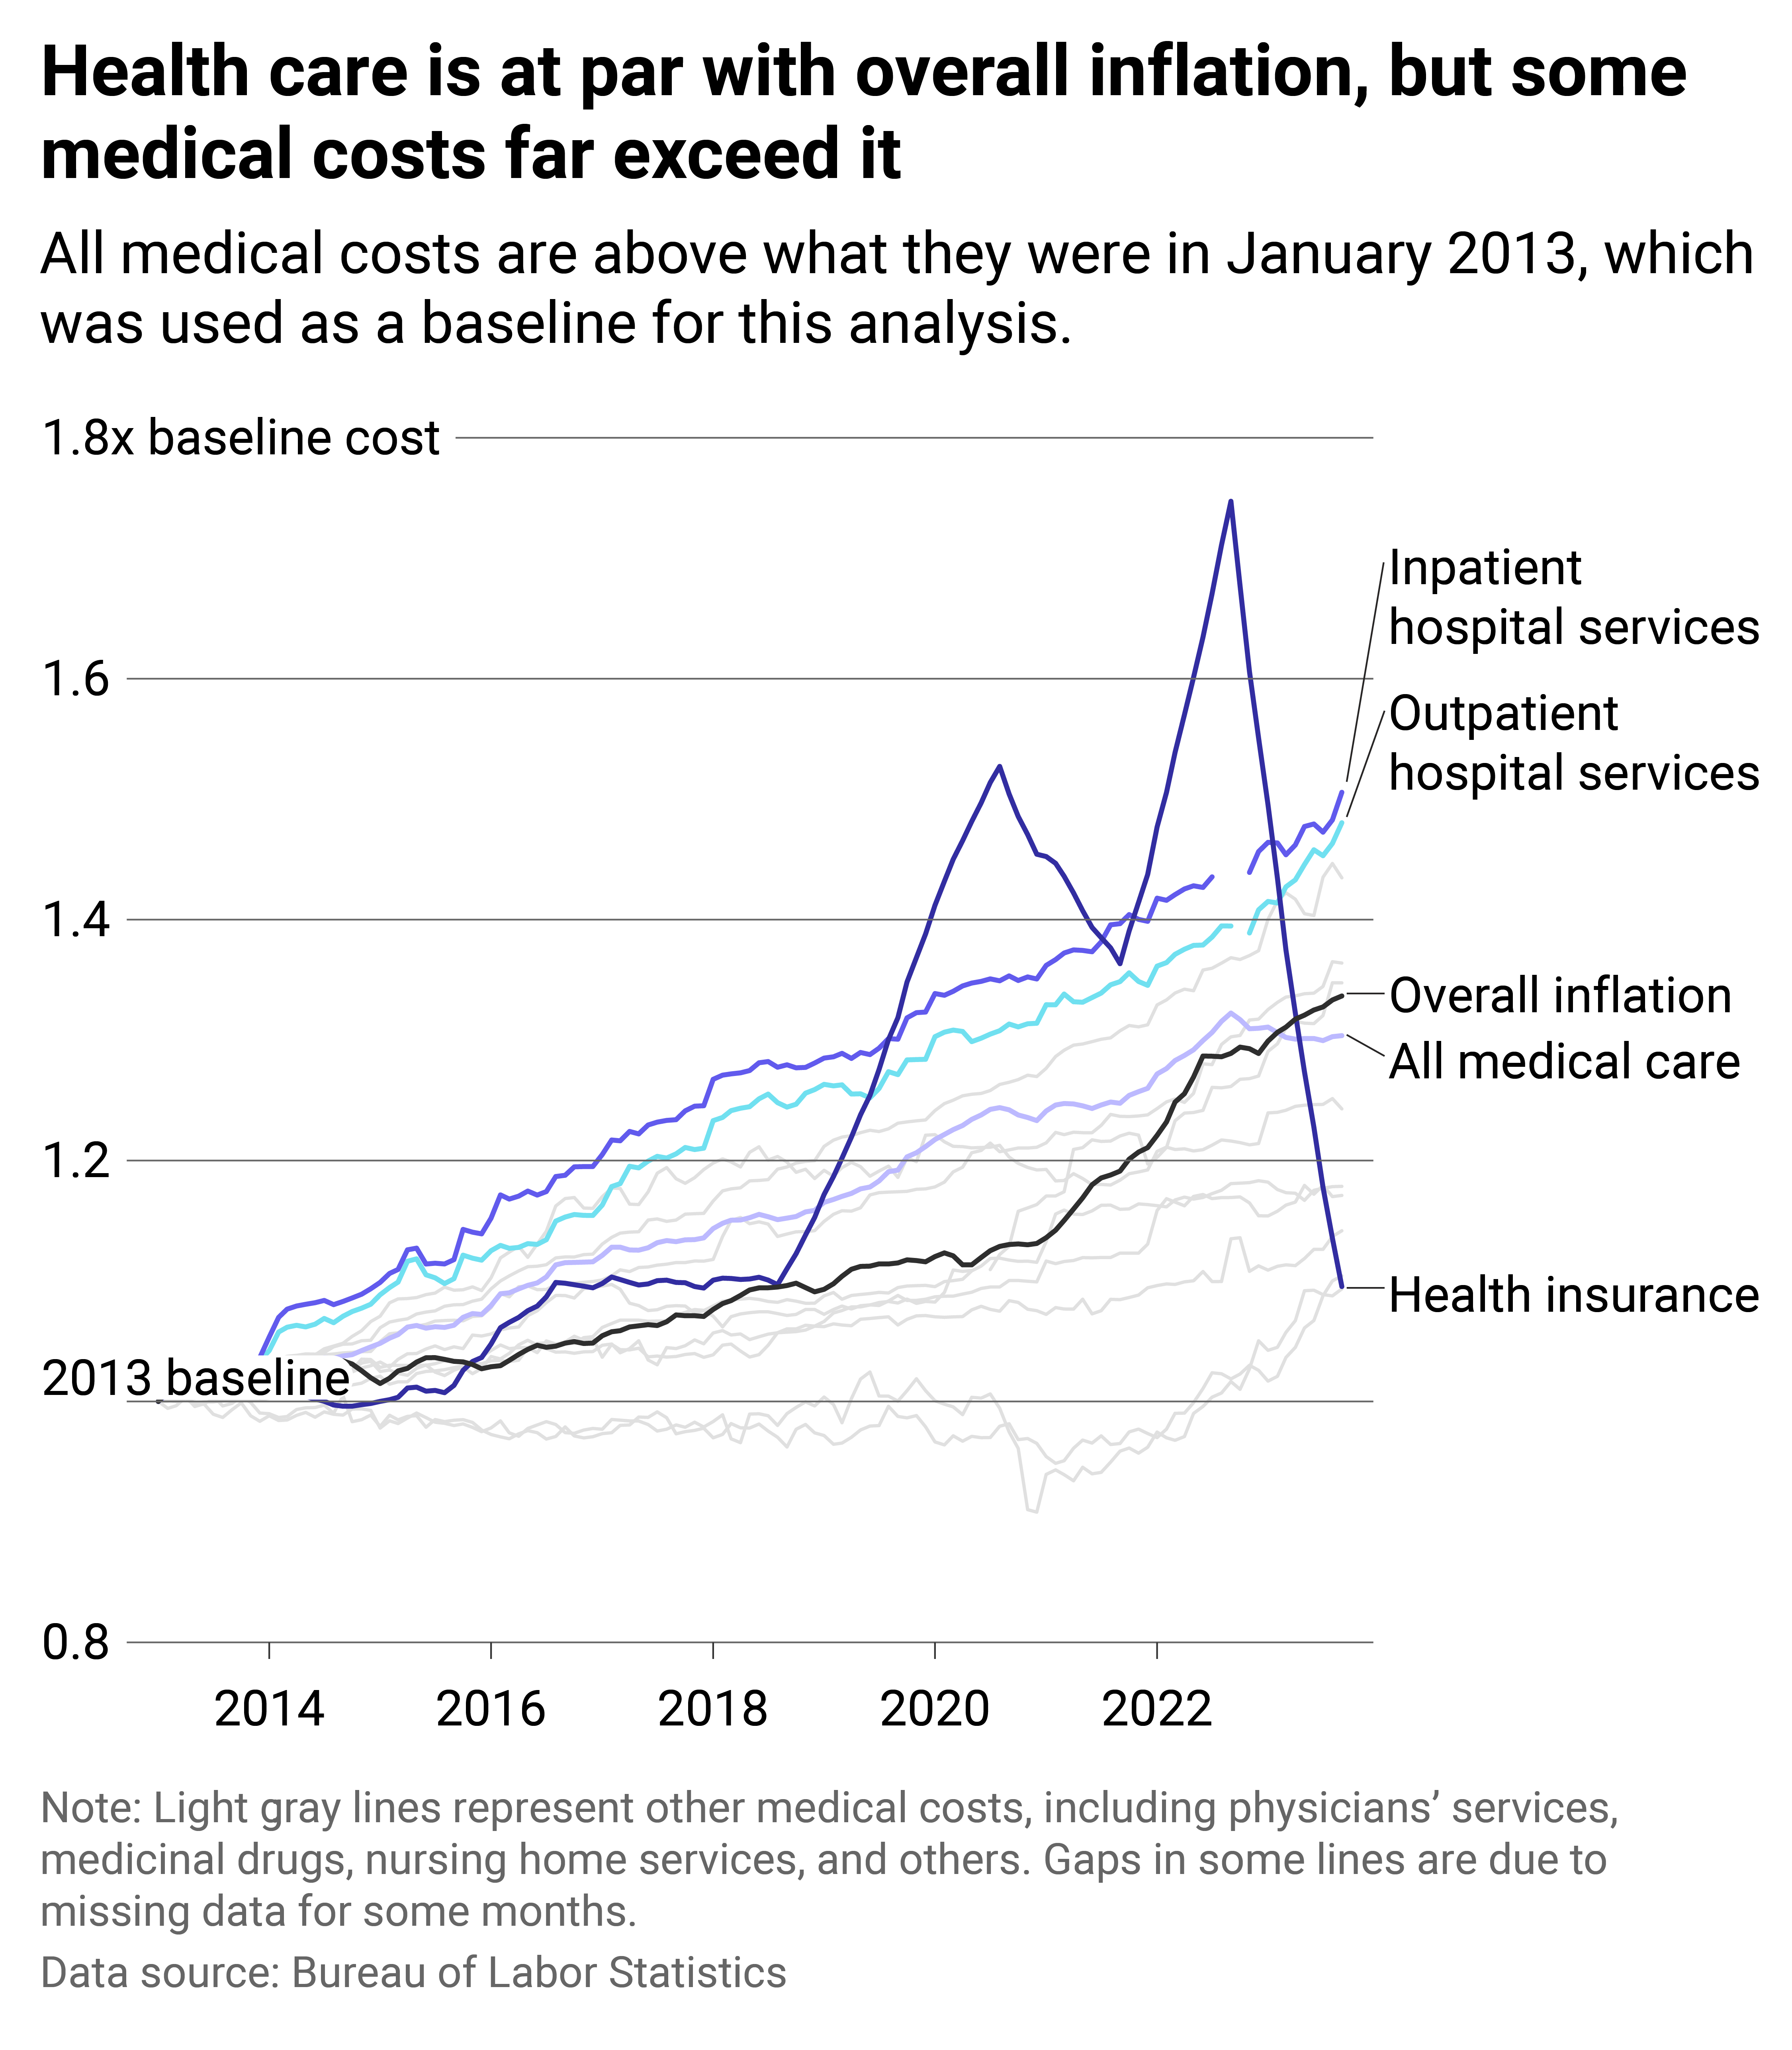 A multiline chart showing inflation among a variety of medical costs, as well as overall inflation and overall medical inflation.